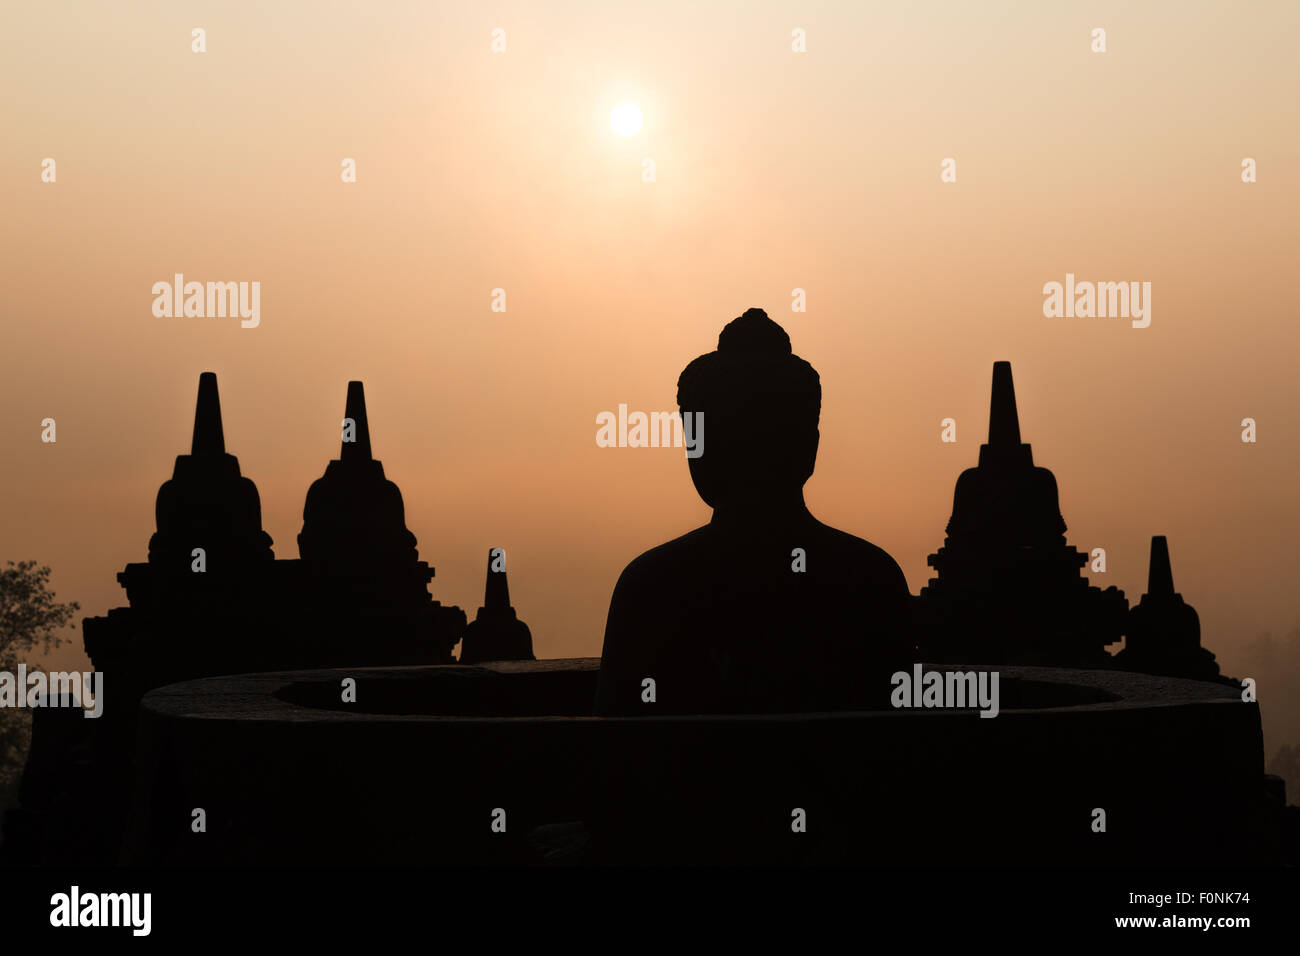 Silhouettes of a buddha statue at the Unesco world heritage site the Borobudur temple at dawn on the island of Java, Indonesia, Asia. Stock Photo